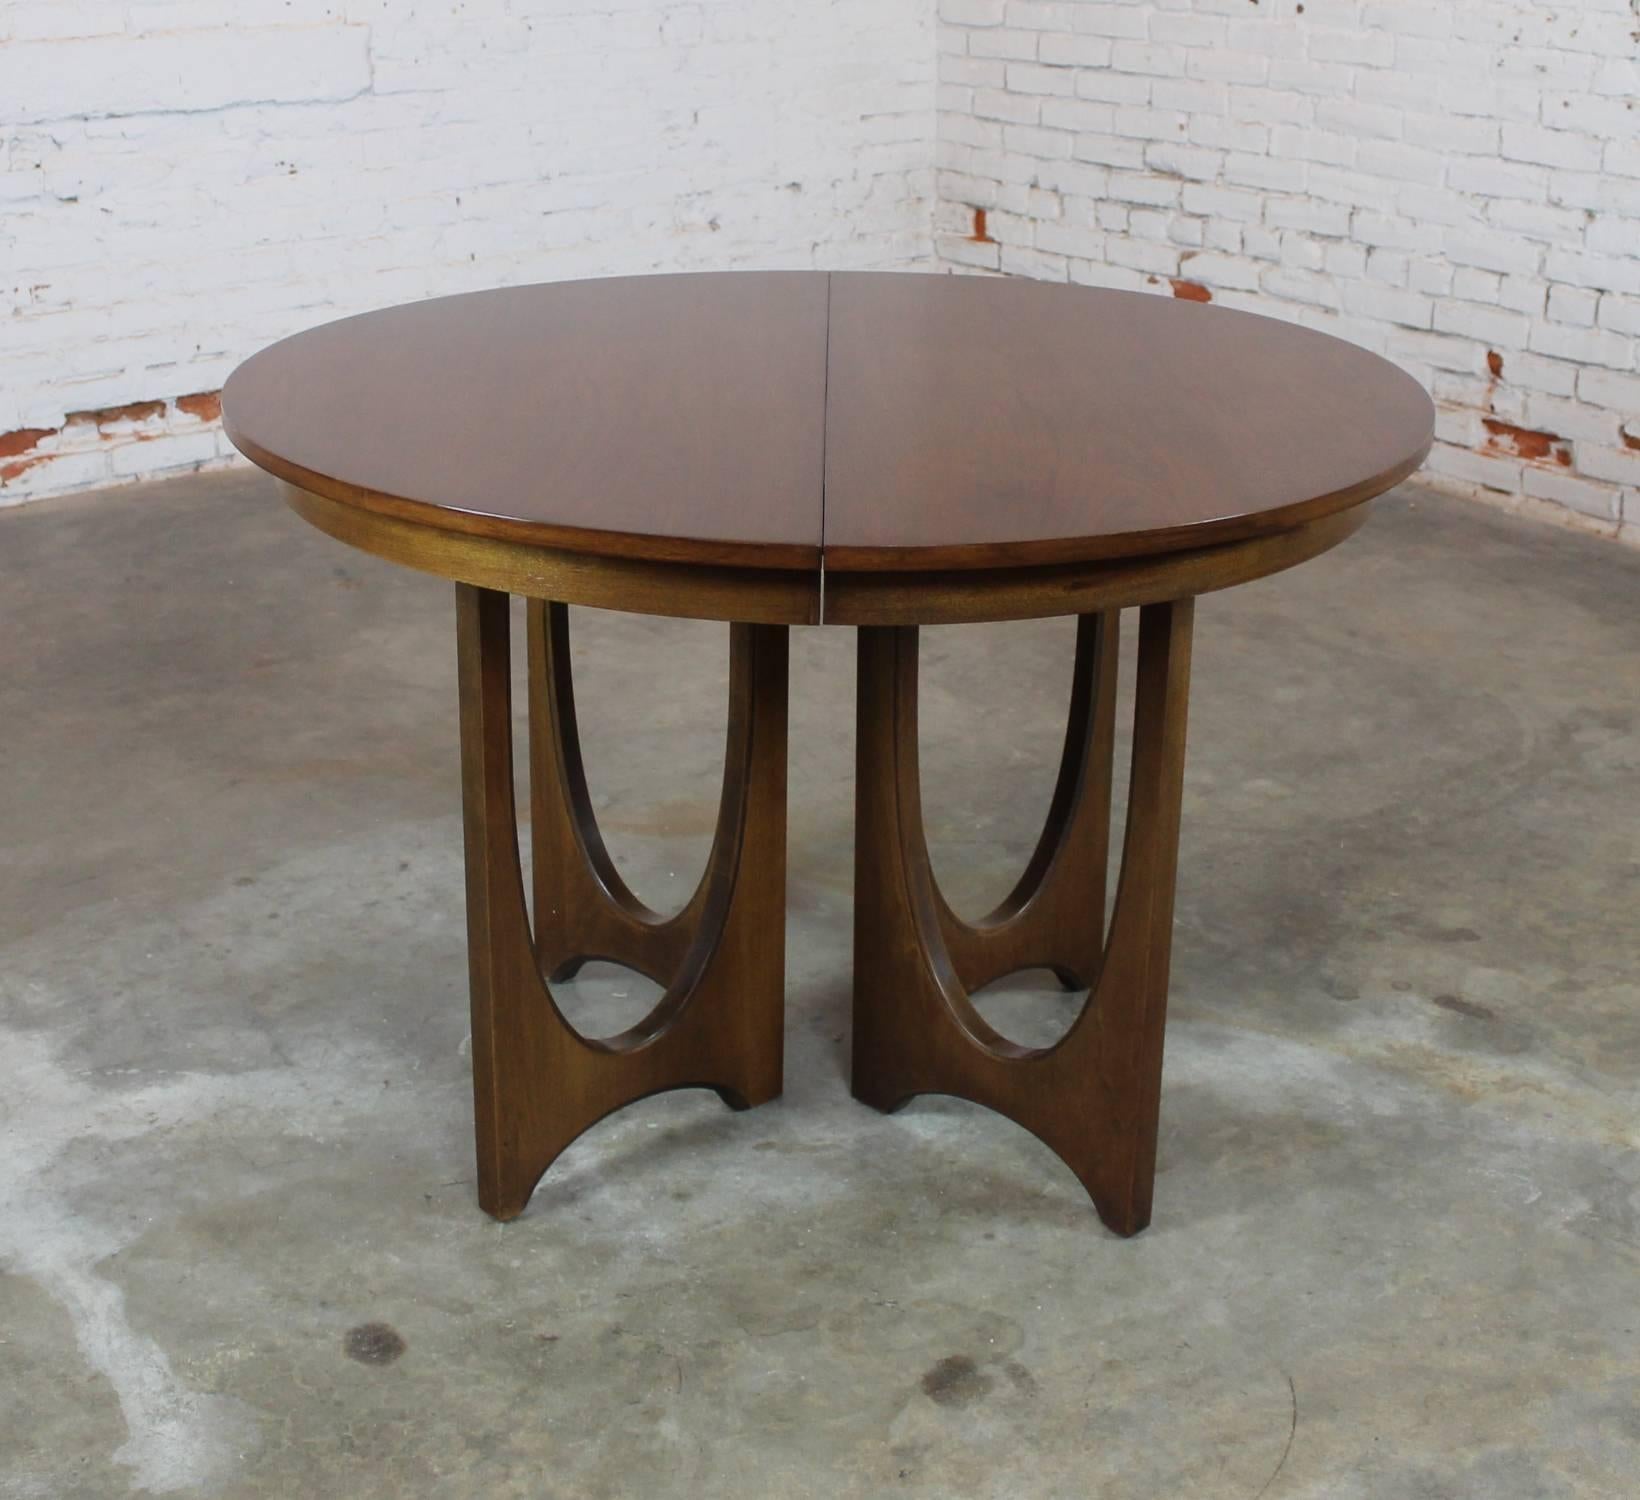 Absolutely wonderful Mid-Century Modern 6140-45 walnut dining table with three 12-inch leaves from the Brasilia collection by Broyhill Premier. This table is in very good condition. We even have its set of table pads.

If you are looking for a